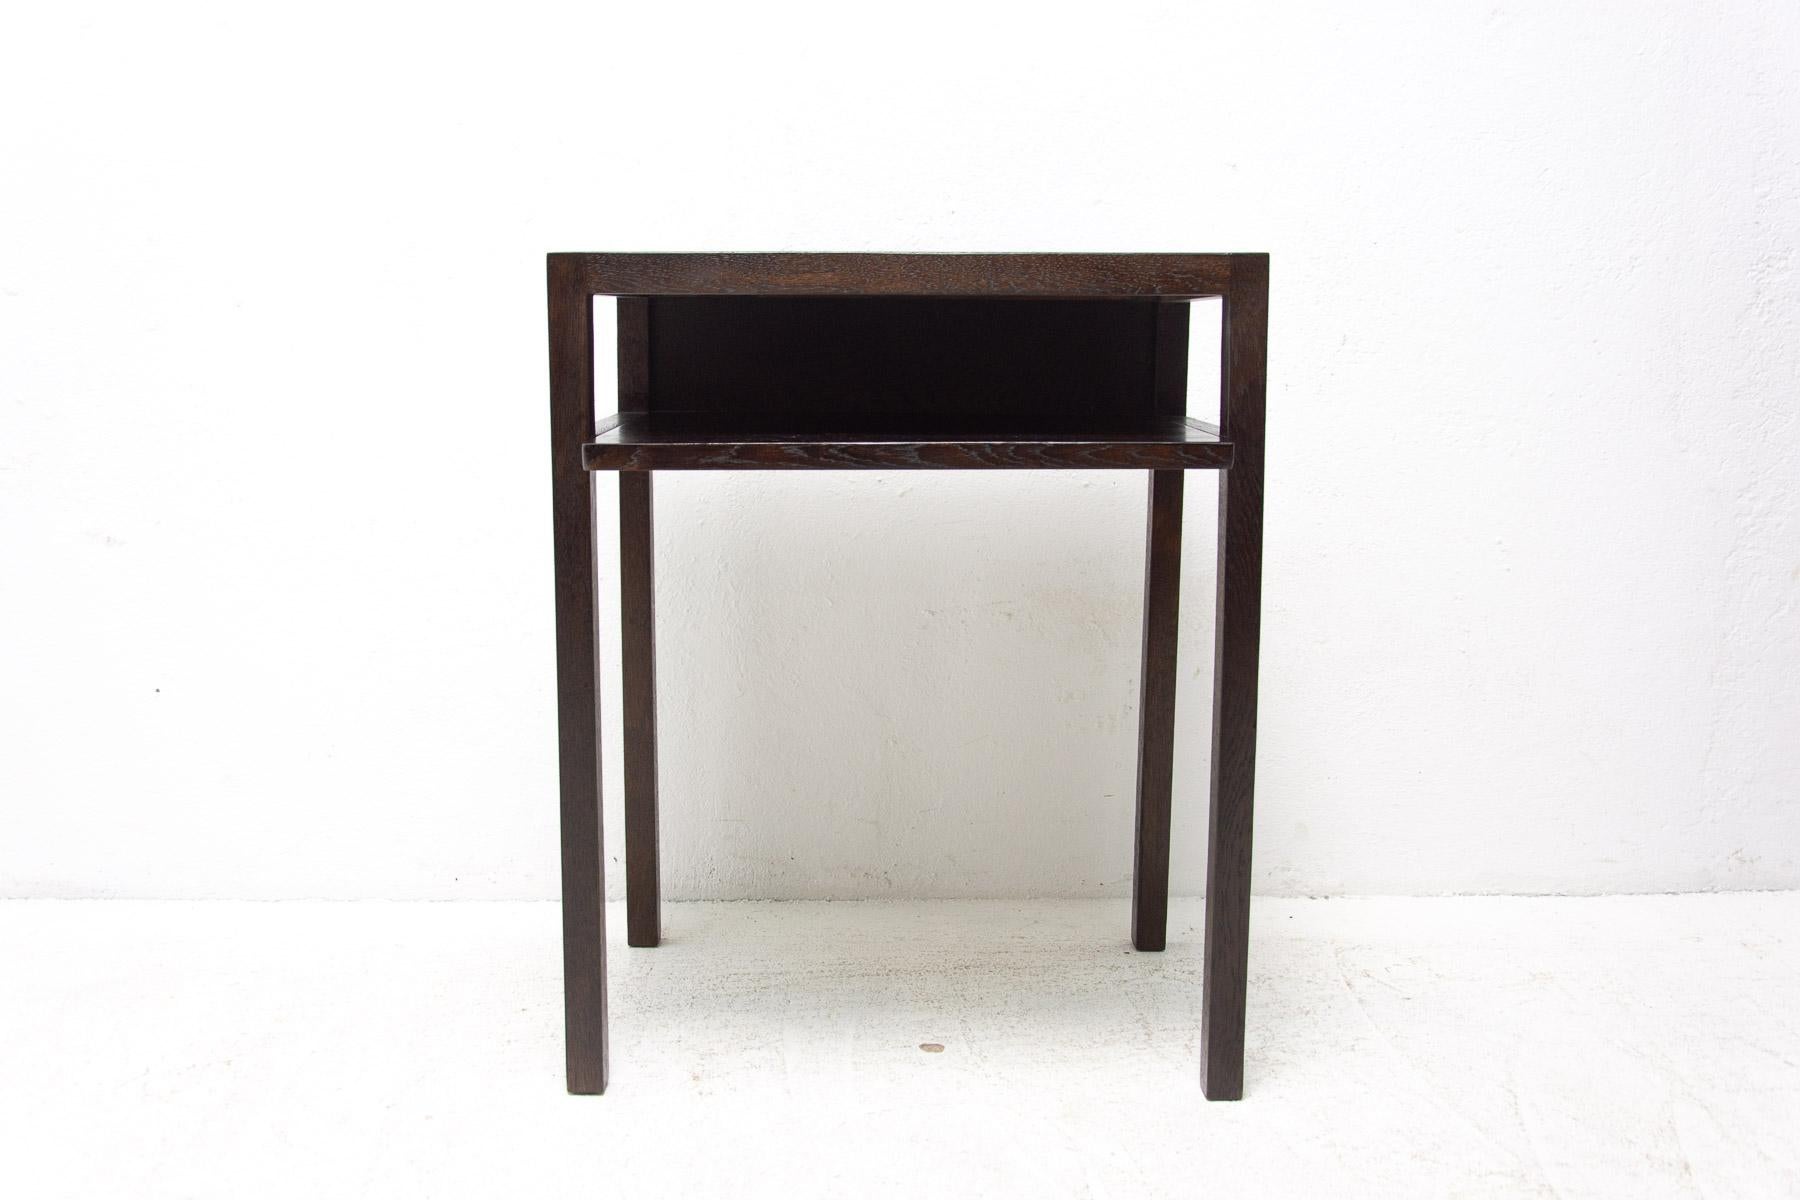 This Modernist piece was originally designed as a table for holding a radio with an adjustable shelf for newspapers or books. The table was produced in the 1930s by the renown UP Brno and designed by Jindrich Halabala.
The table has a very